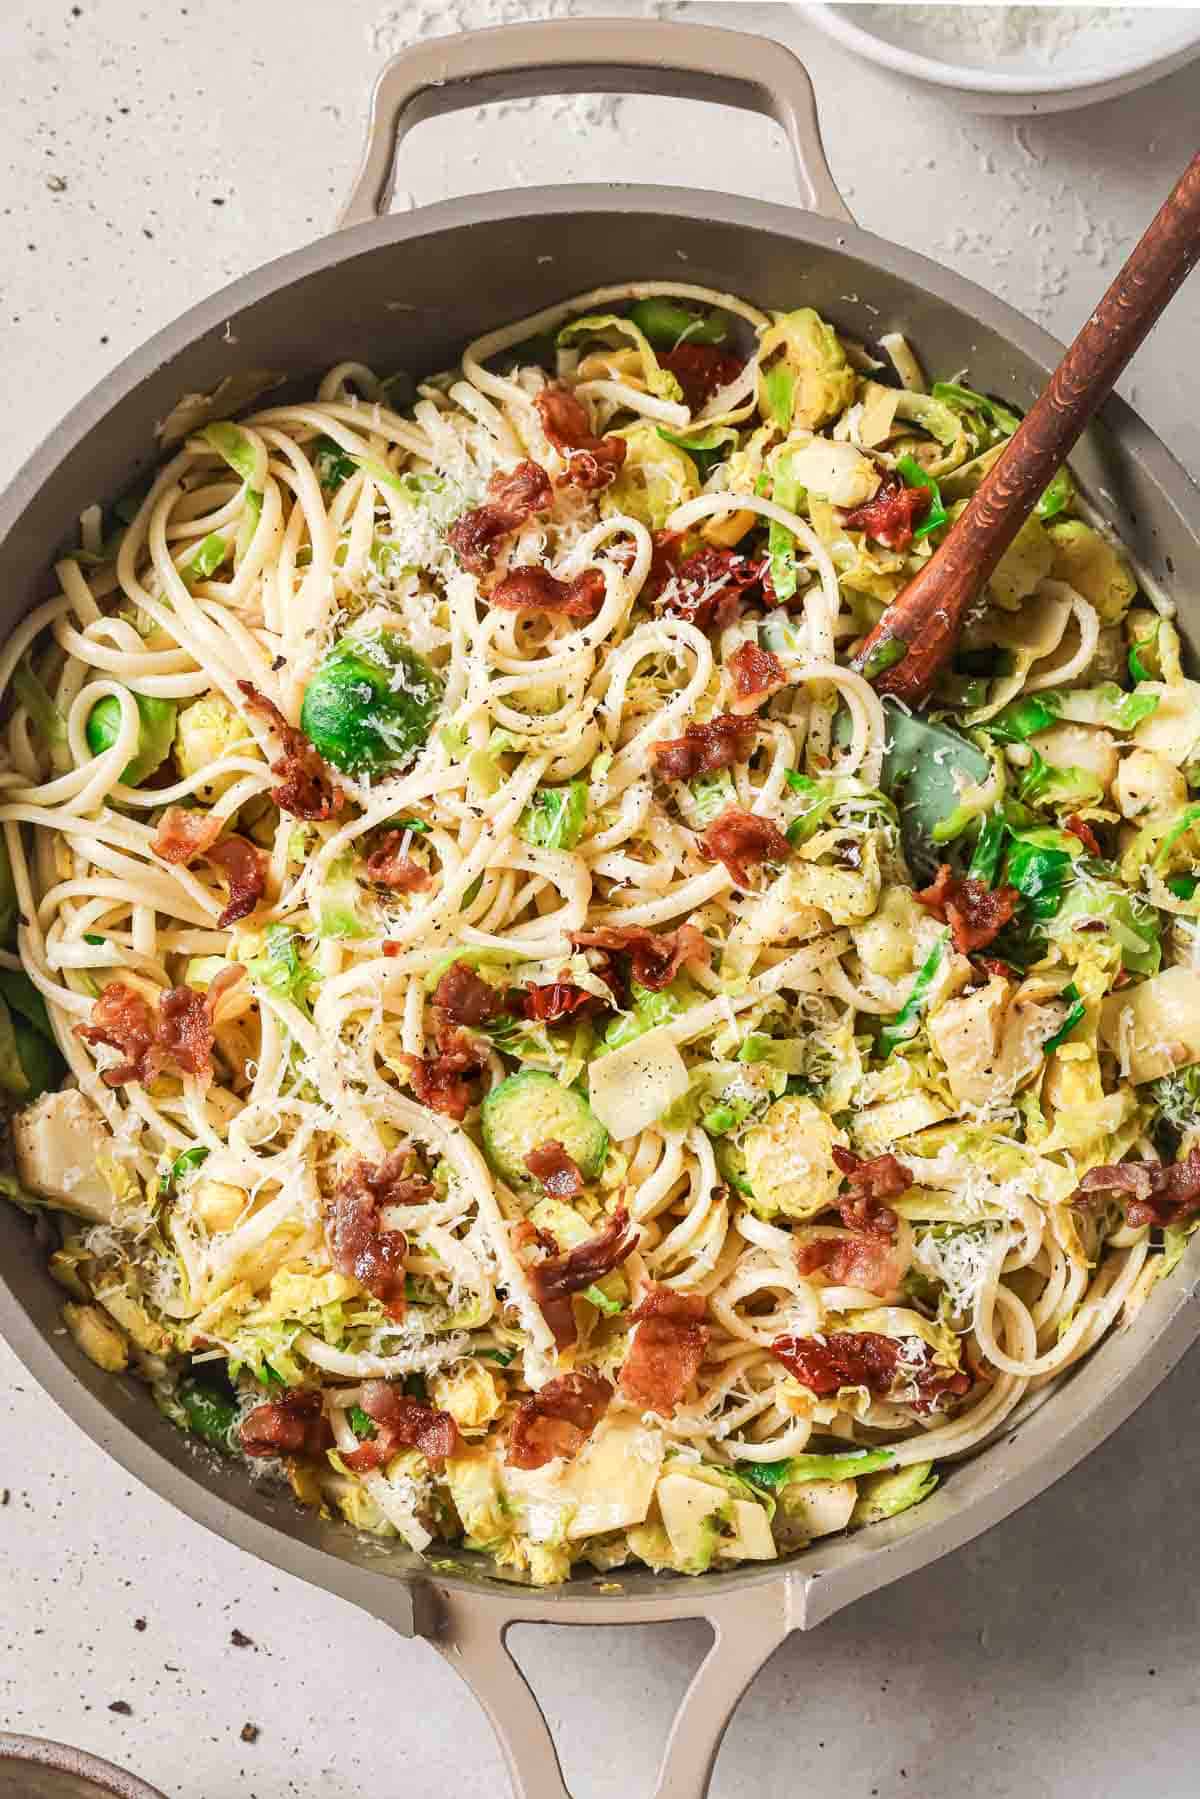 A skillet filled with pasta, bacon and brussels sprouts.